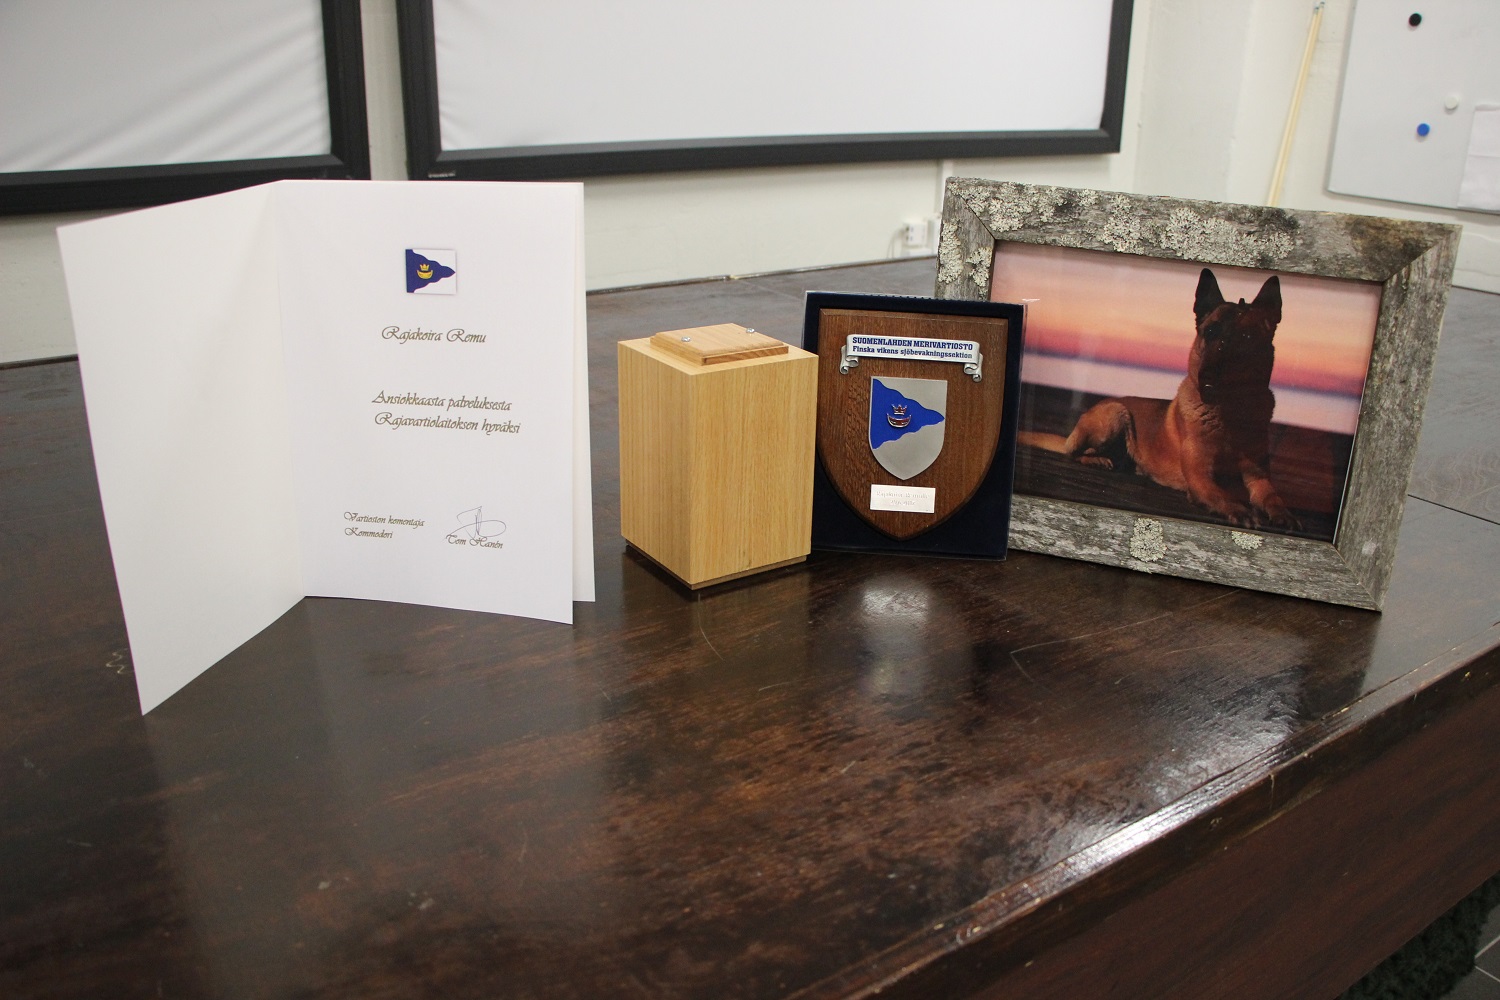 A memorial card, a wooden object, a coat of arms of the Gulf of Finland Coast Guard District and a framed photo of Remu as a puppy are on the table.